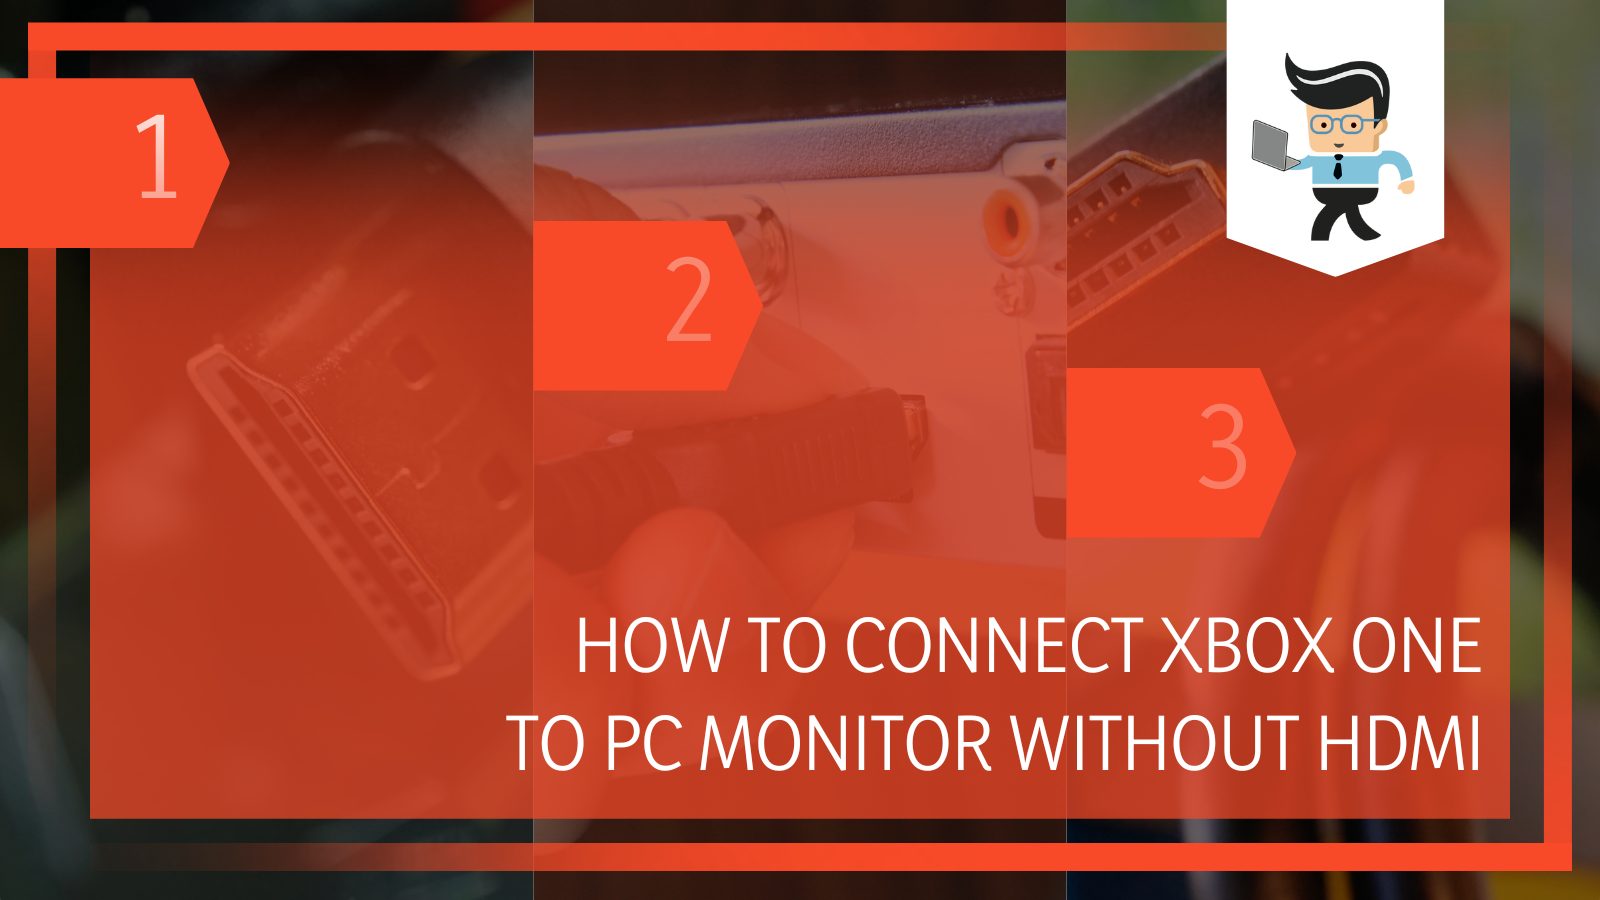 How To Connect Xbox One to PC Monitor Without HDMI